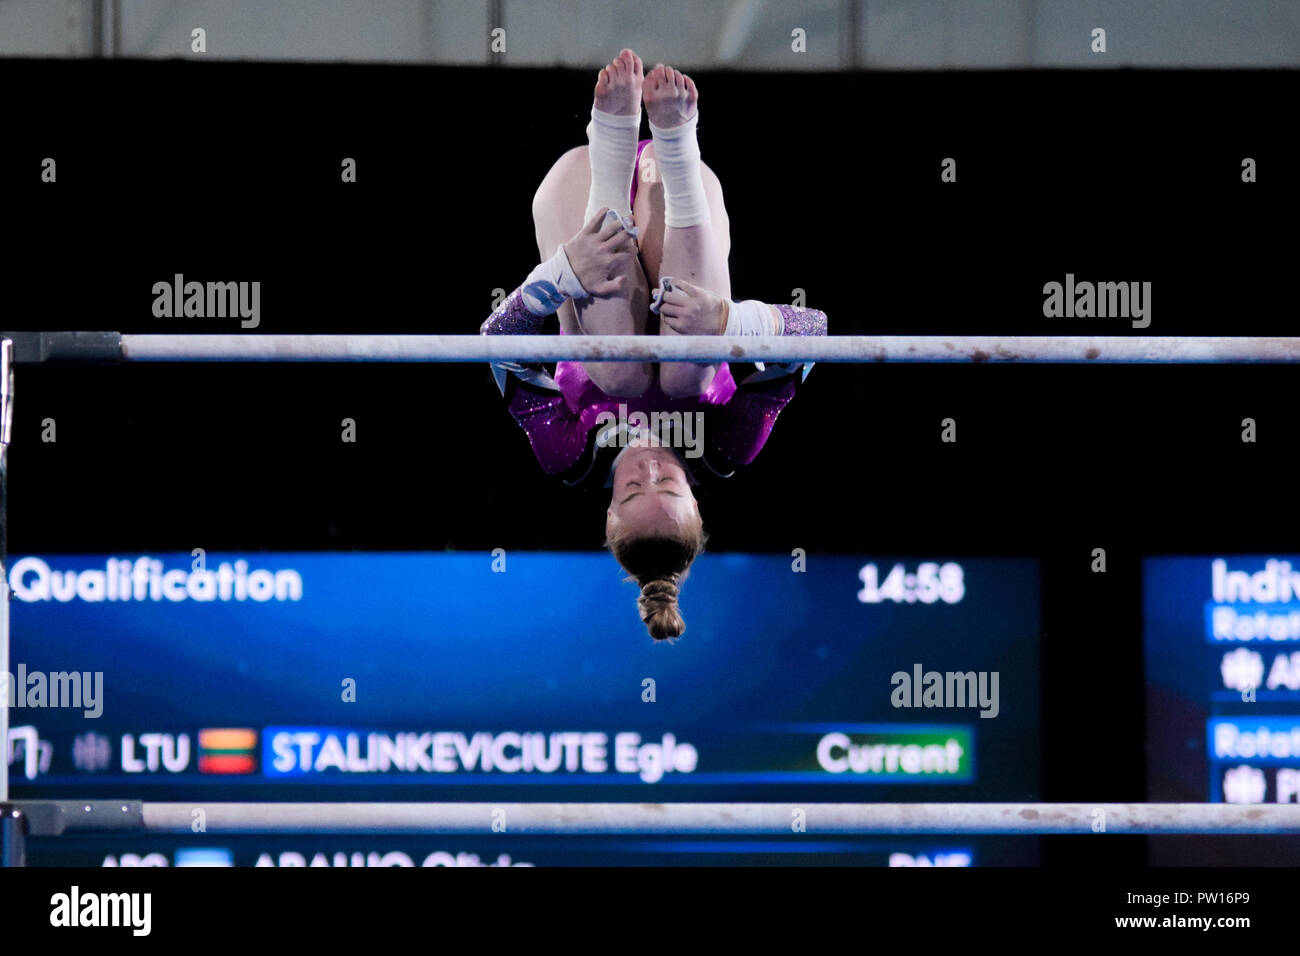 Buenos Aires, Buenos Aires, Argentina. 9th Oct, 2018. Egle stankeviciute of Lithuania seen in action during the game where she finished in the 16th position in the asymmetric bars competition. Credit: Fernando Oduber/SOPA Images/ZUMA Wire/Alamy Live News Stock Photo